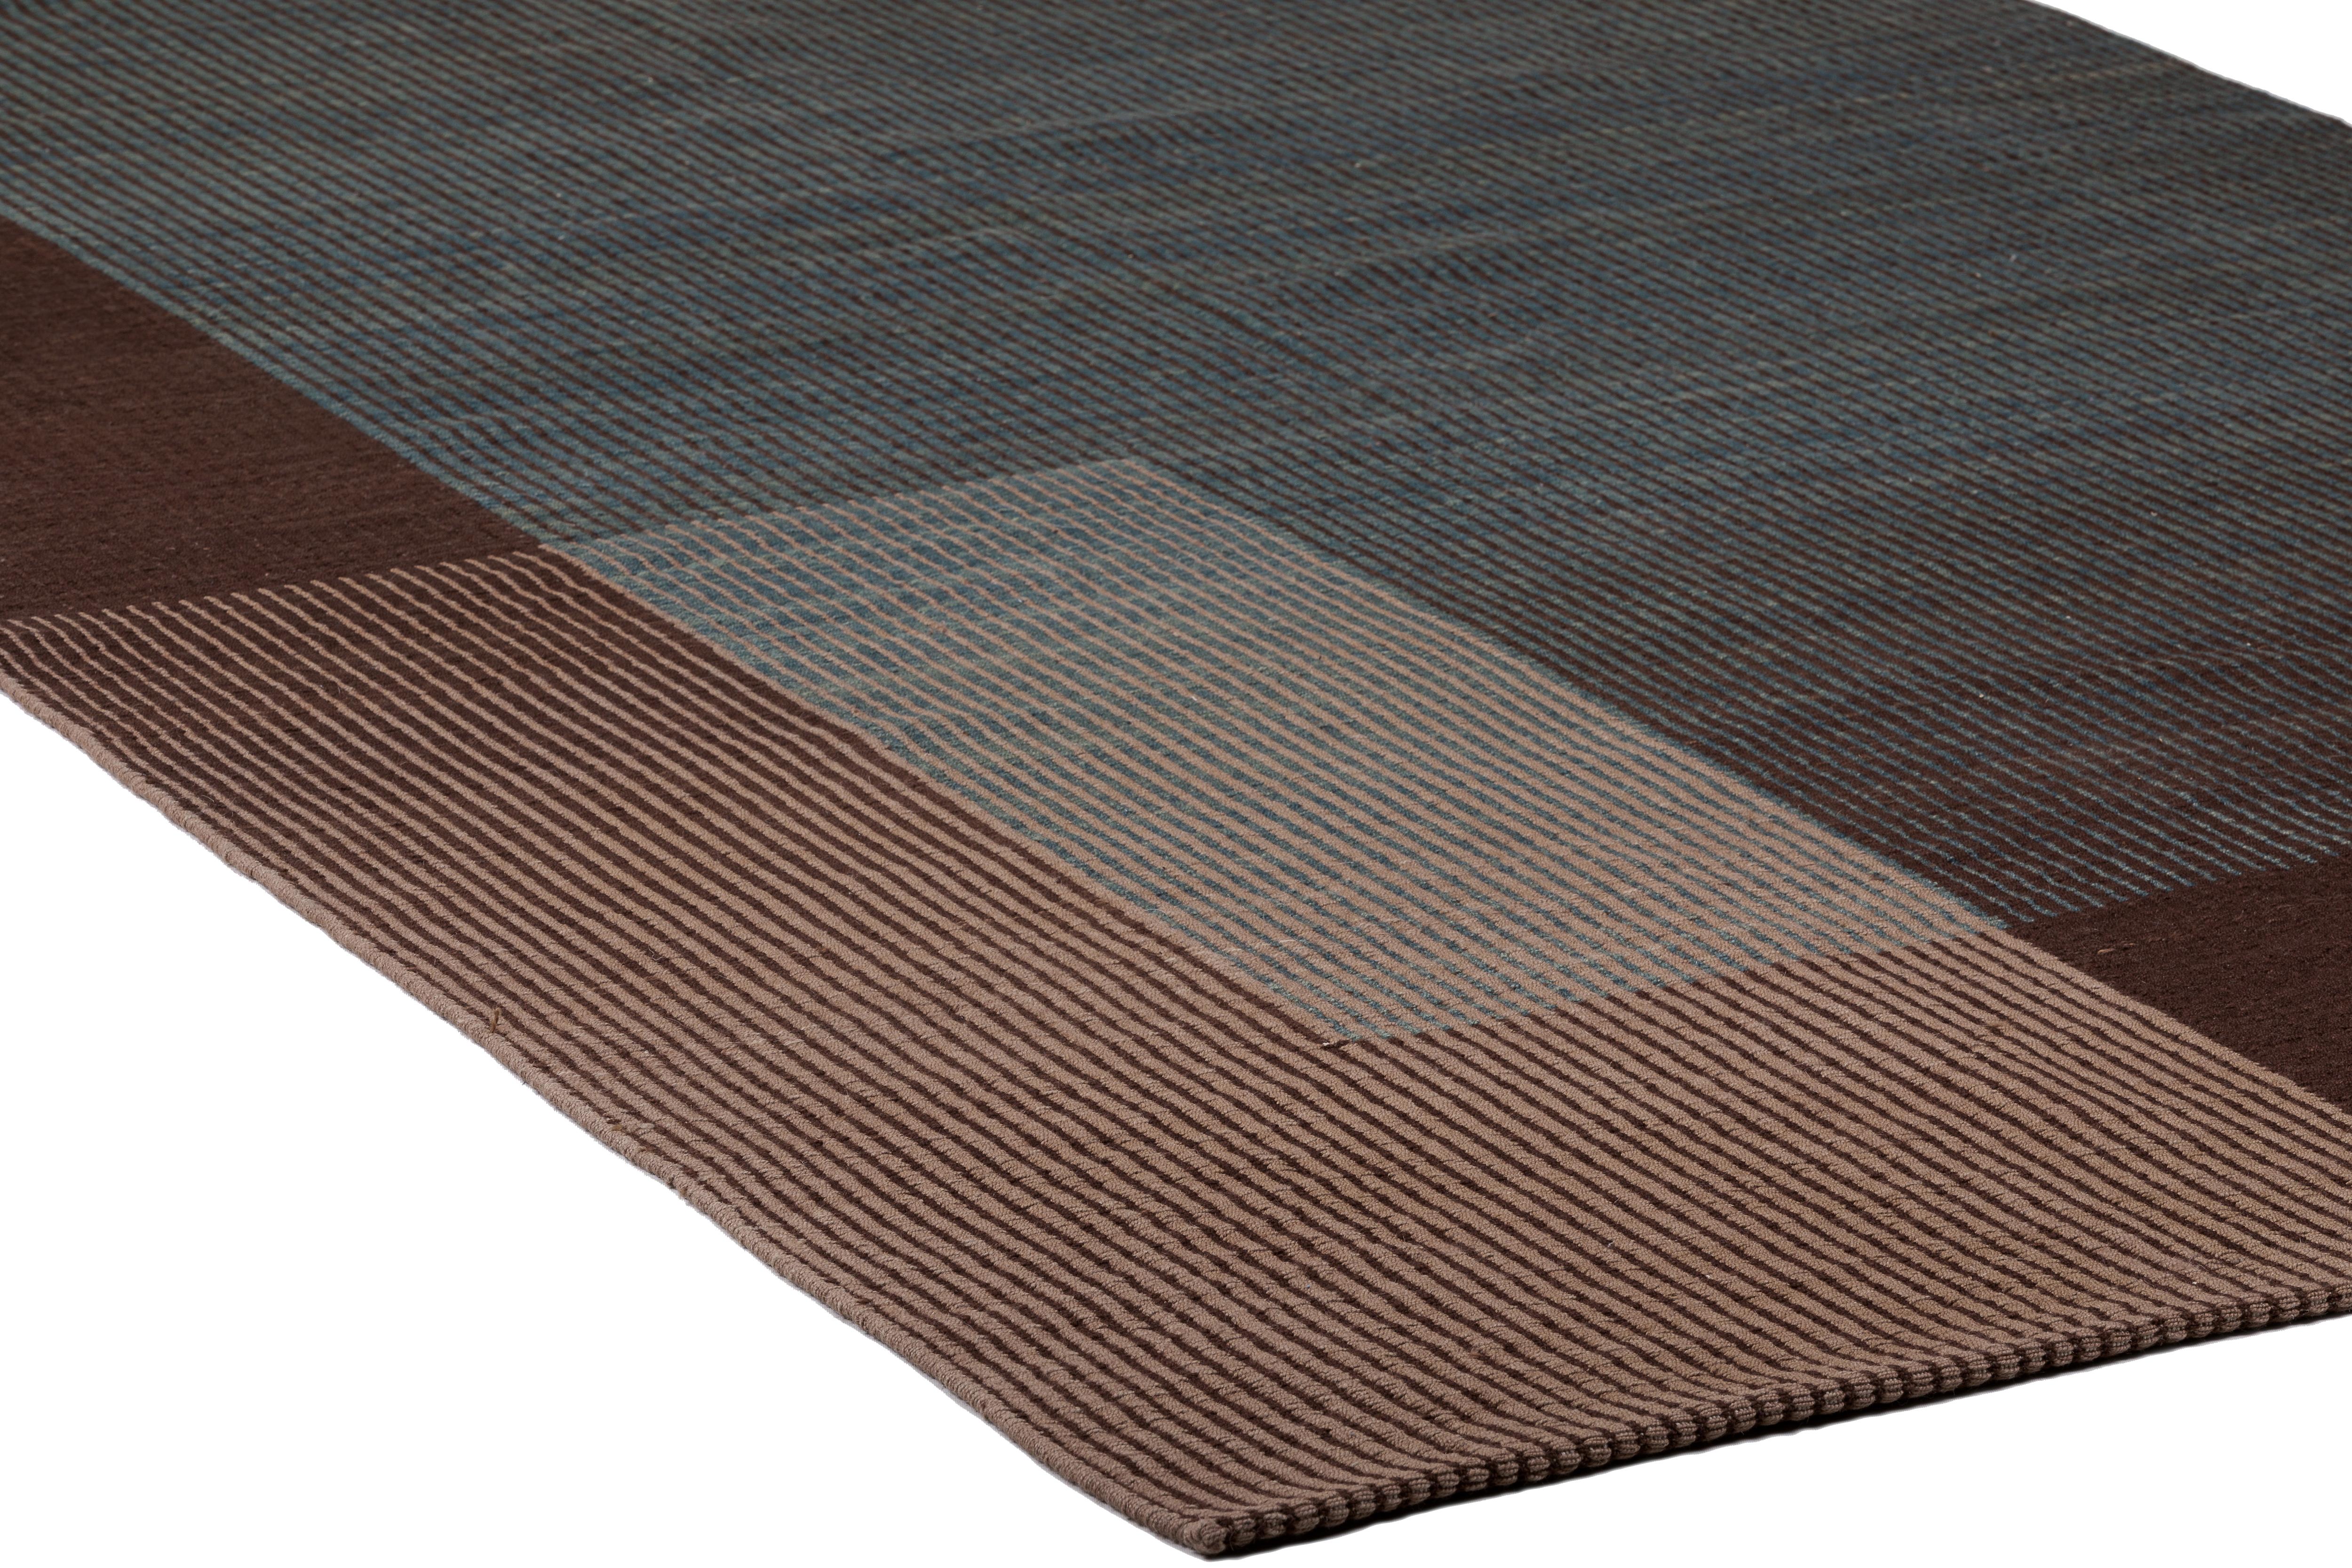 Haze is a contemporary kilim rug collection inspired by the hazy view of landforms layered behind each other on a misty morning in Tuscany. 

Haze rugs have a unique corduroy texture. The subtle change in the thickness of the cords dissolves the